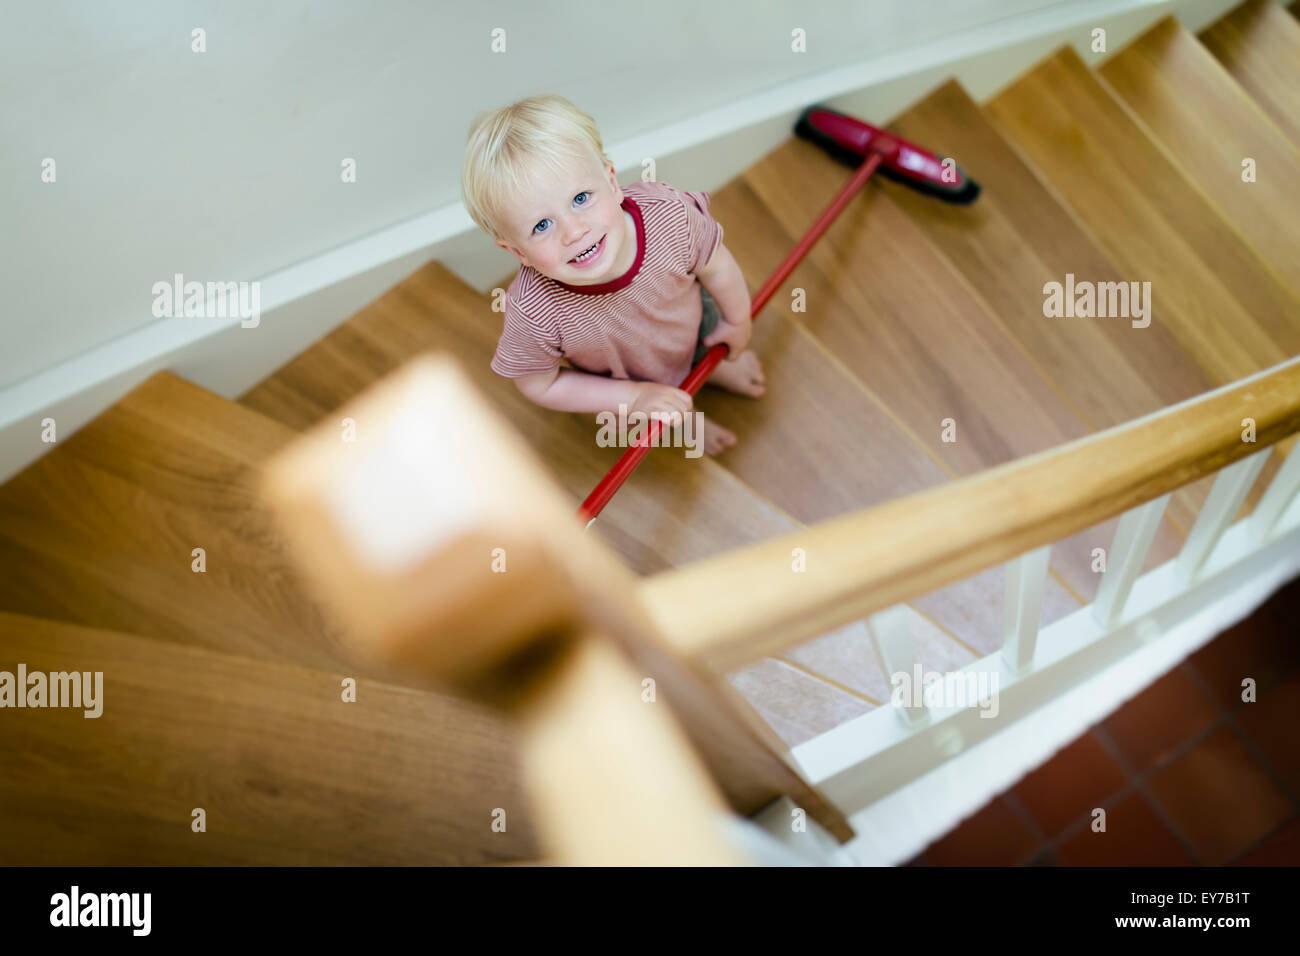 Young boy, 2 years, sweeping a staircase with a broom. Stock Photo